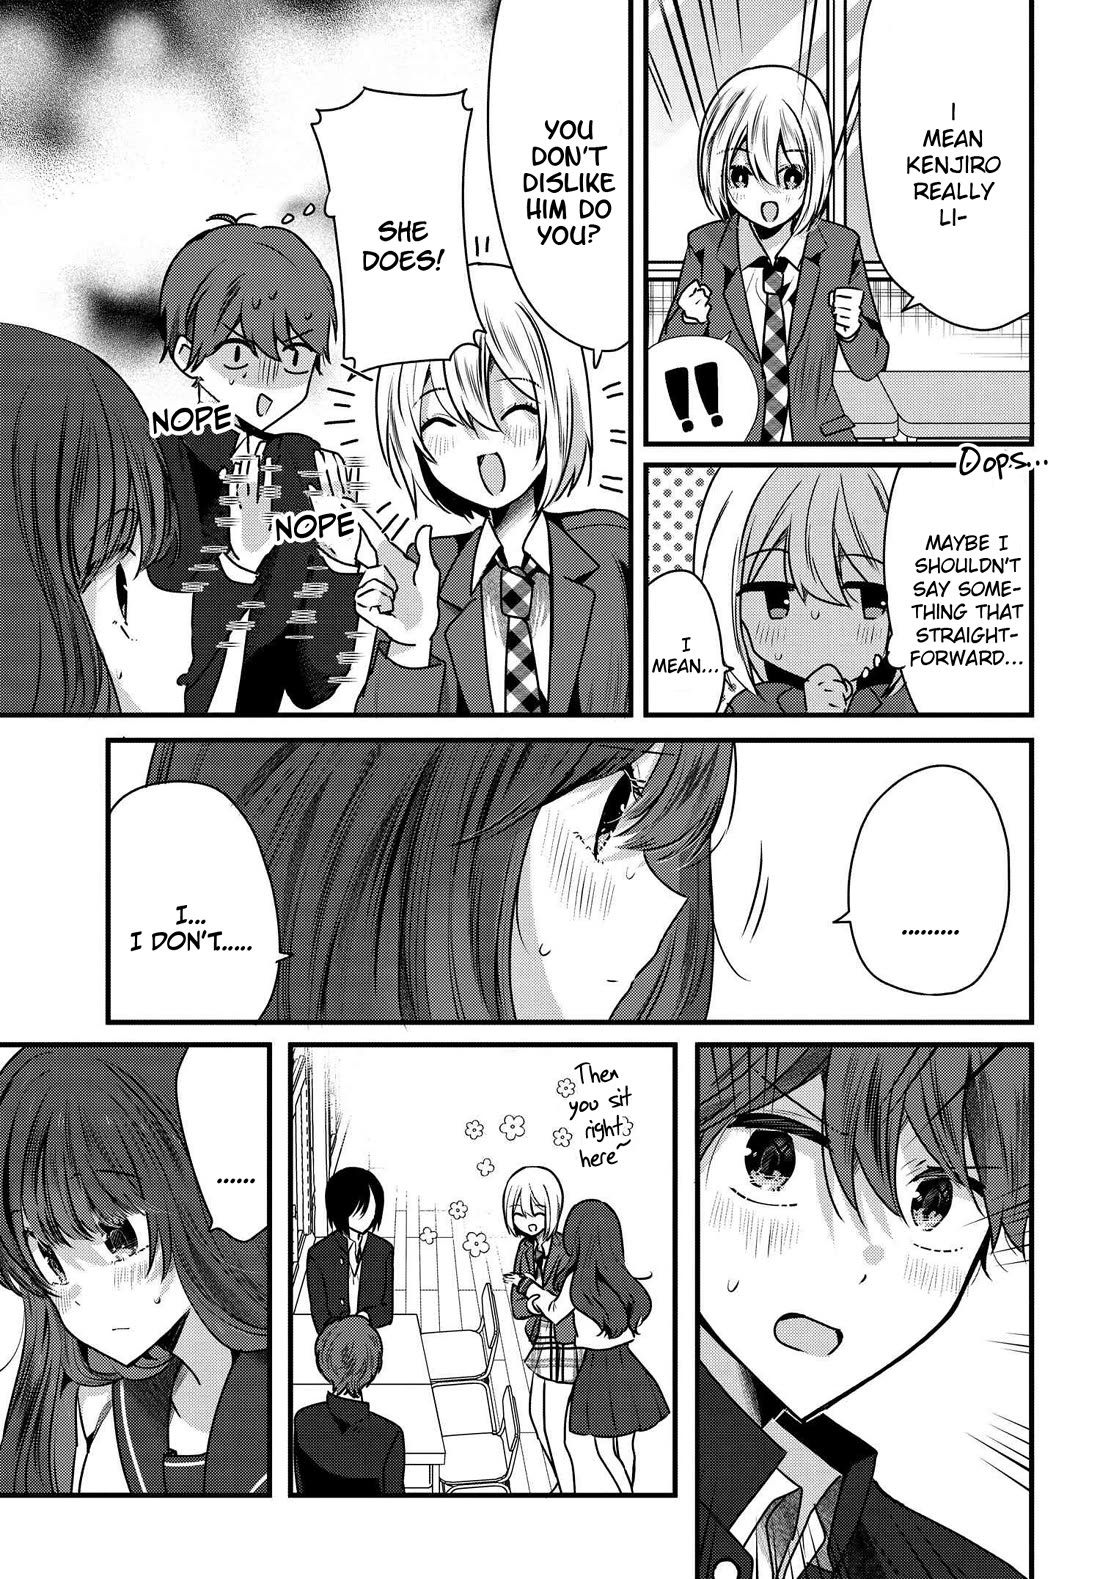 Tozaki-san Is Cold Only to Me - chapter 6 - #5